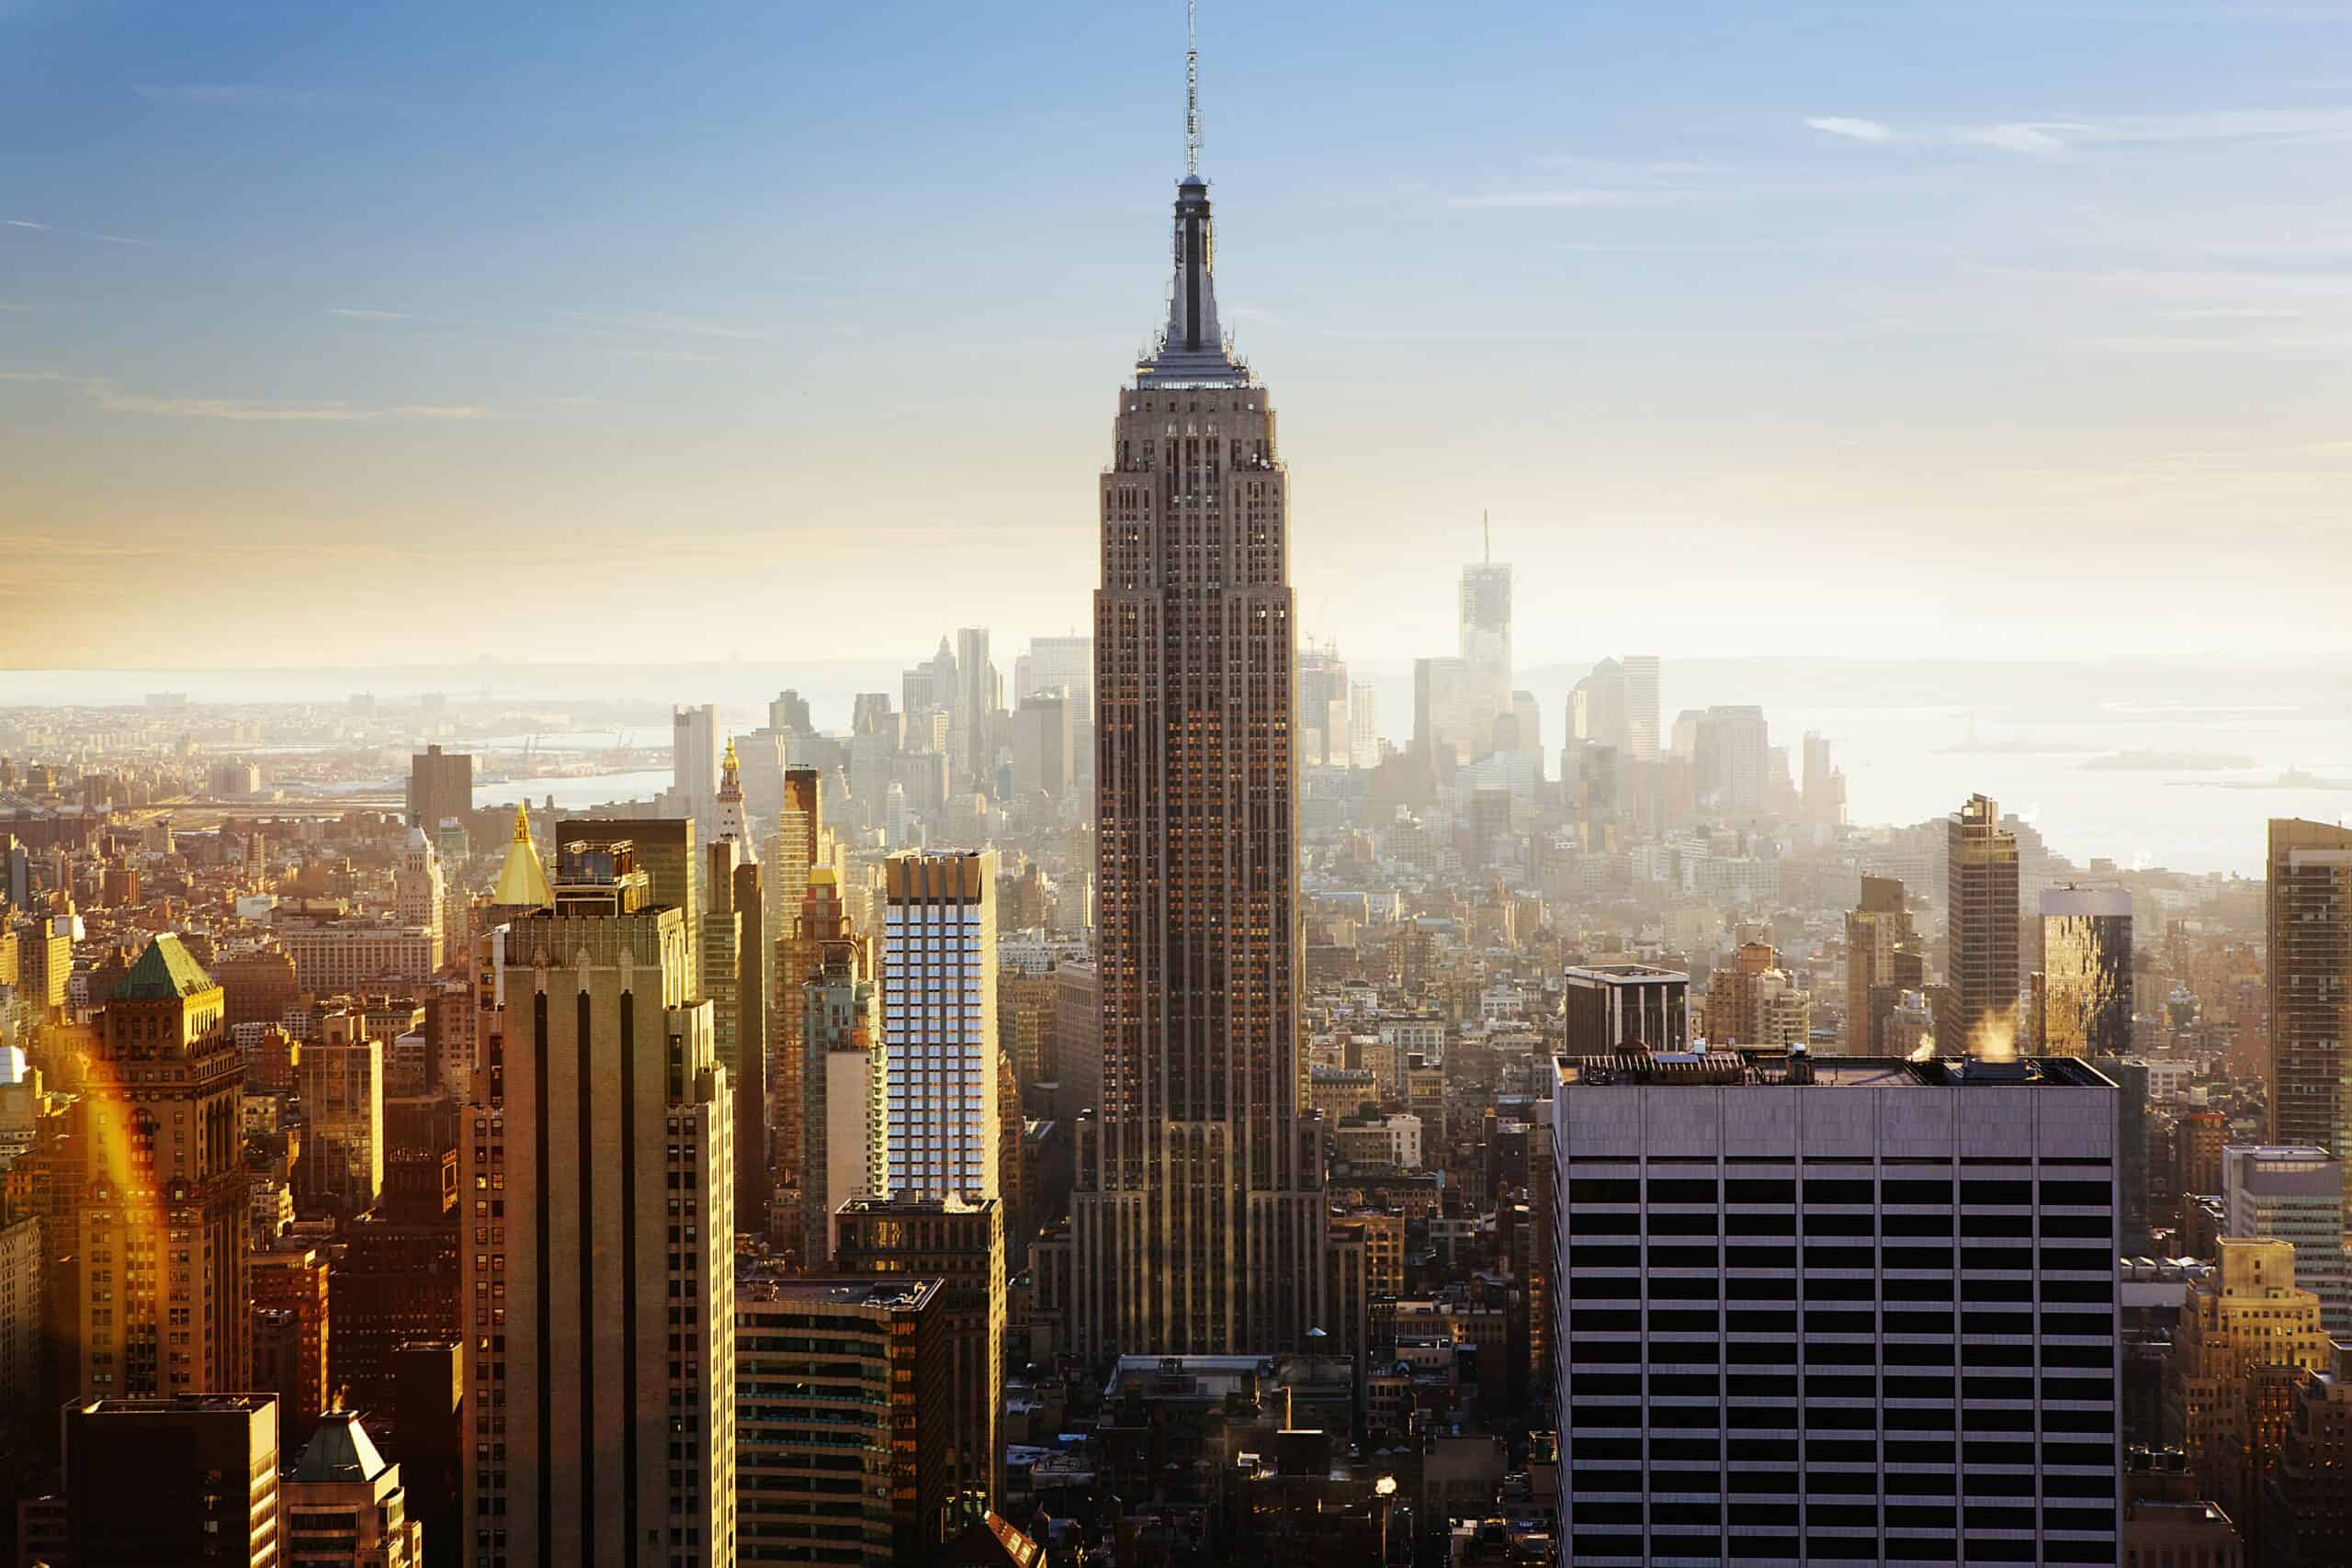 New york city skyline with empire state building